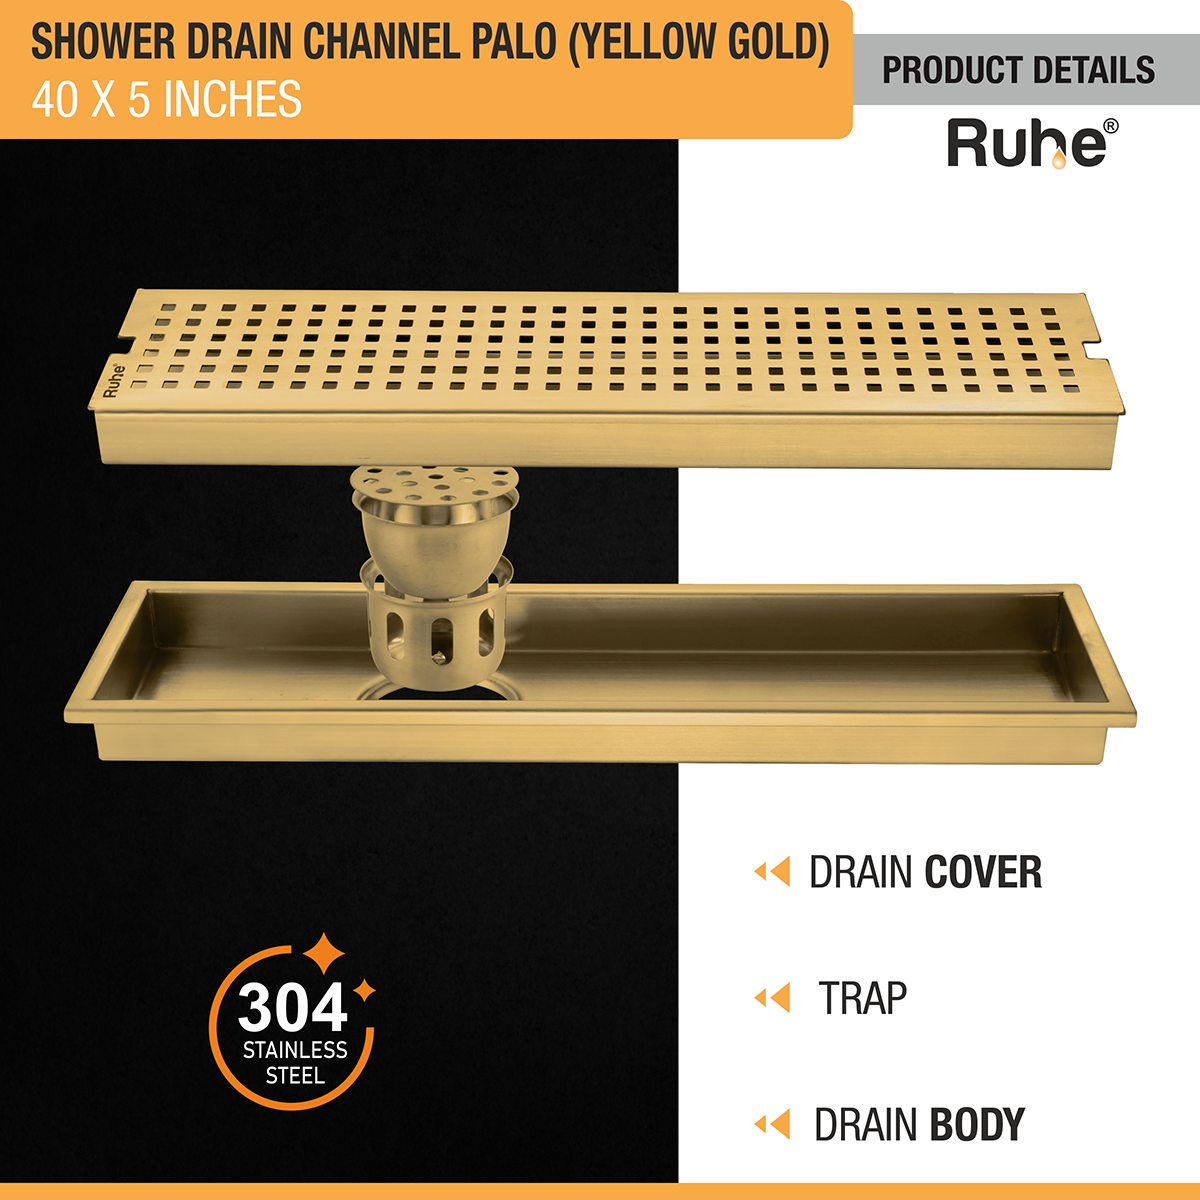 Palo Shower Drain Channel (40 x 5 Inches) YELLOW GOLD product details